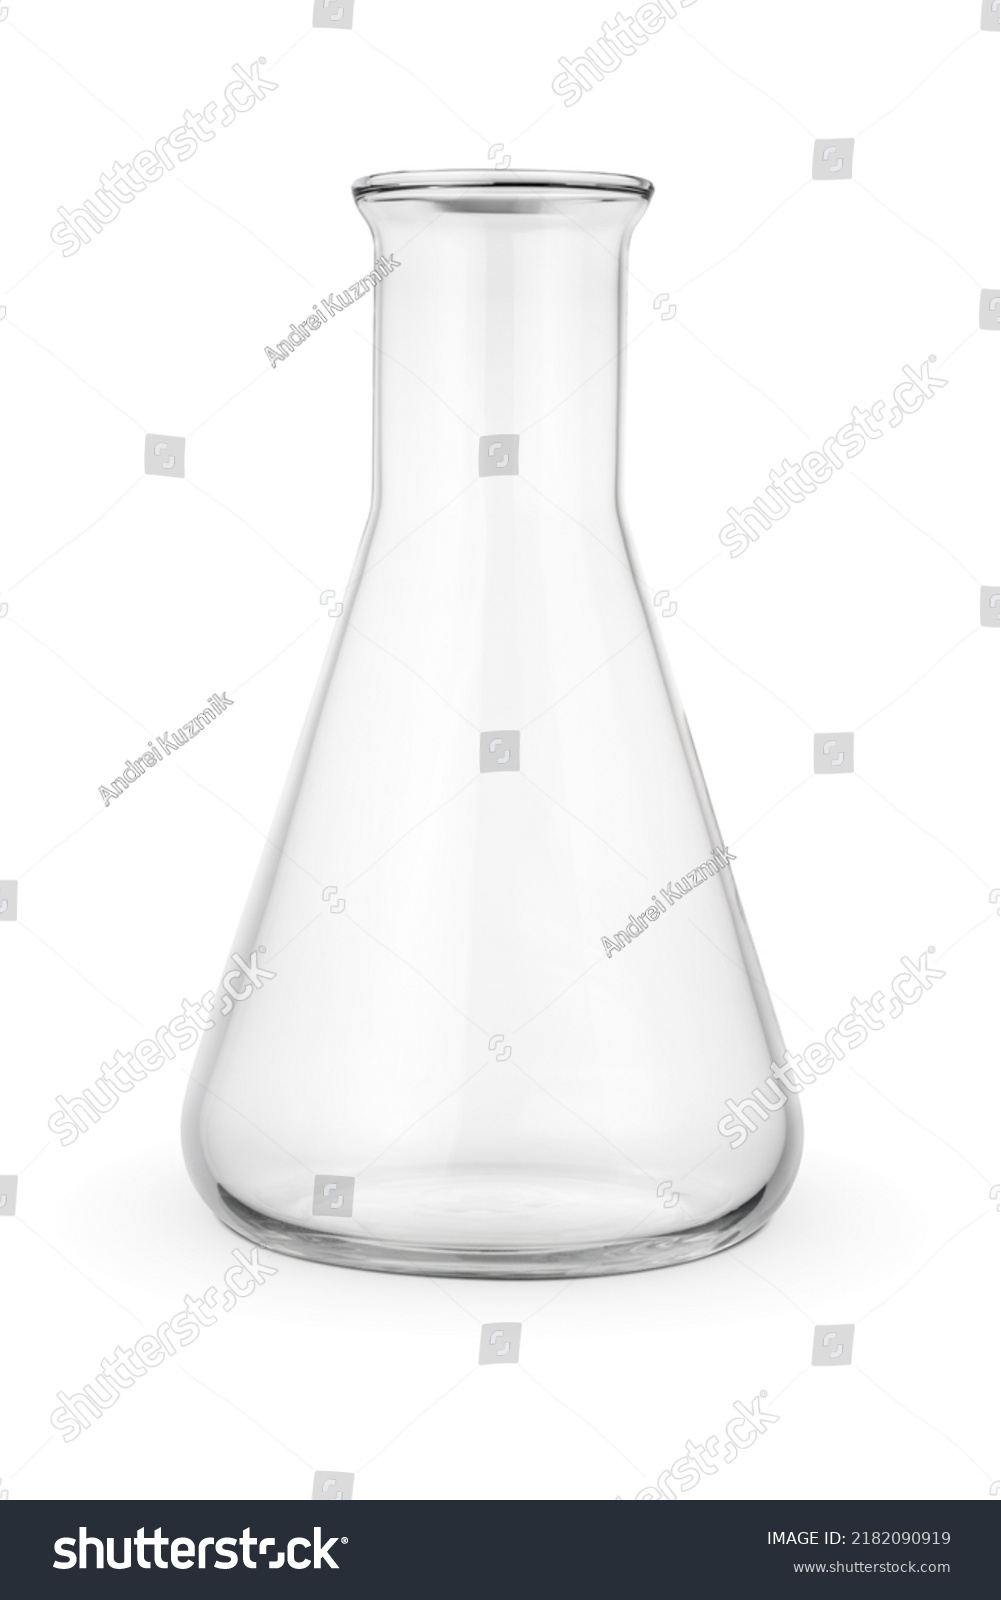 Empty 250 ml Erlenmeyer chemical flask isolated on white background. #2182090919